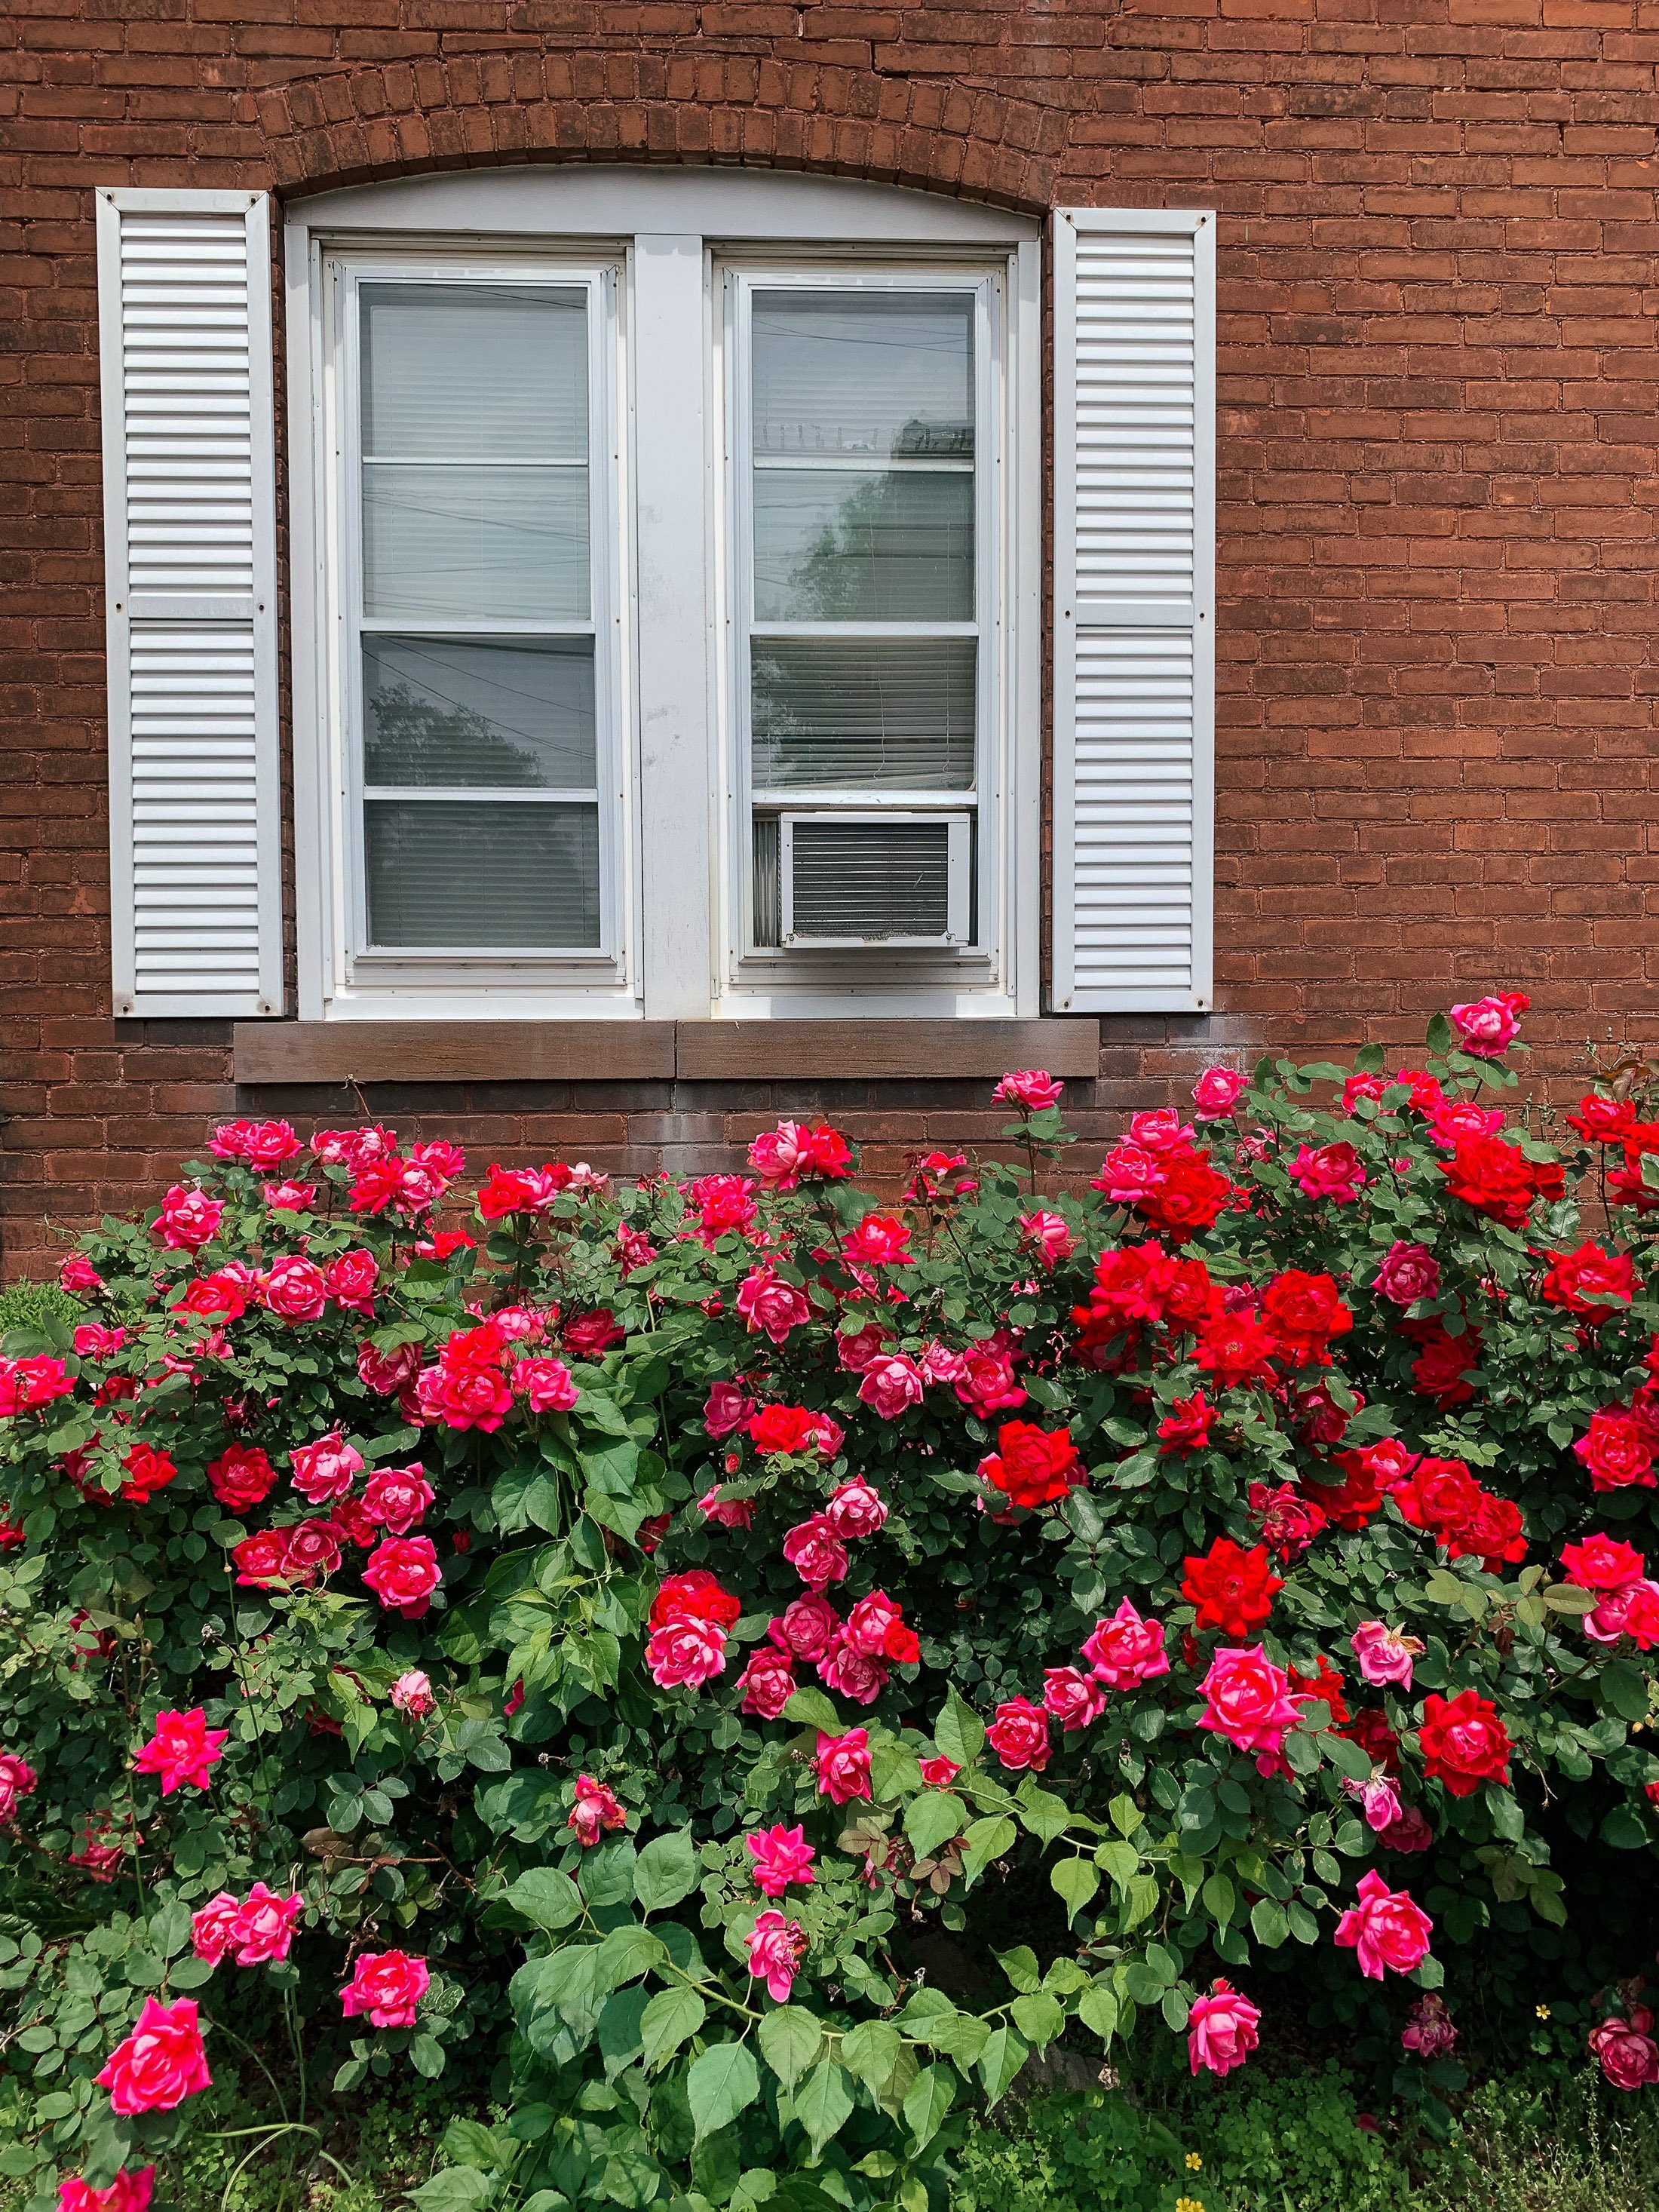 Structure_North End Middletown Flowers-1323.jpg